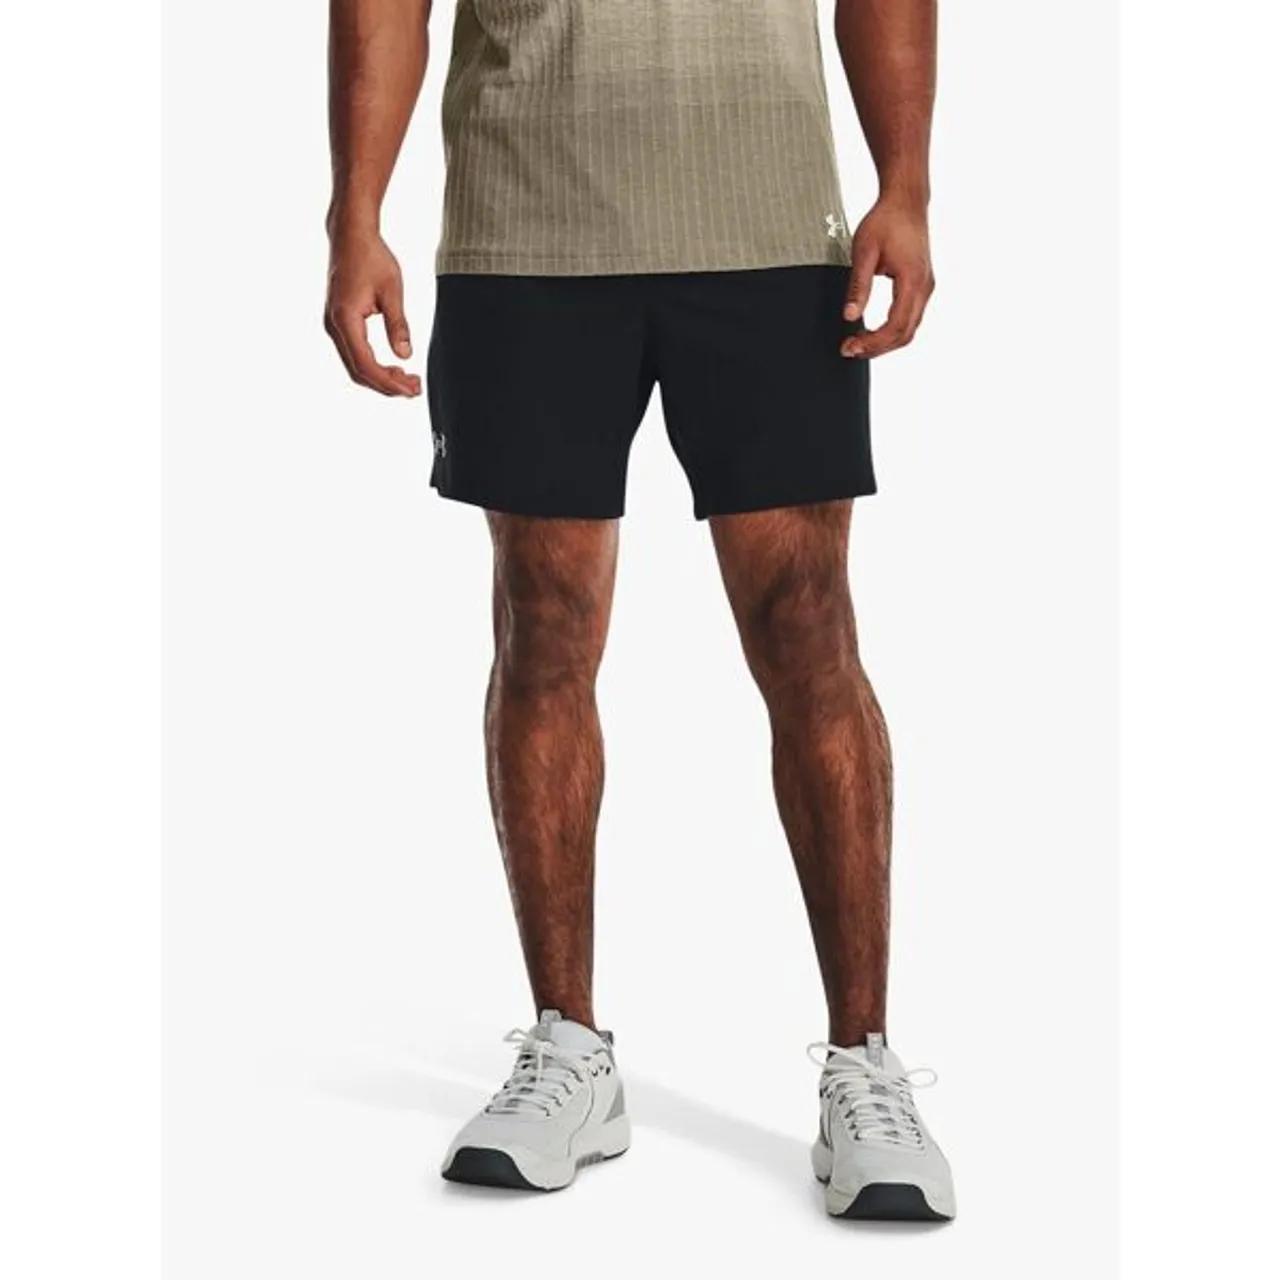 Under Armour Vanish Gym Shorts - Black/Pitch Gray - Male